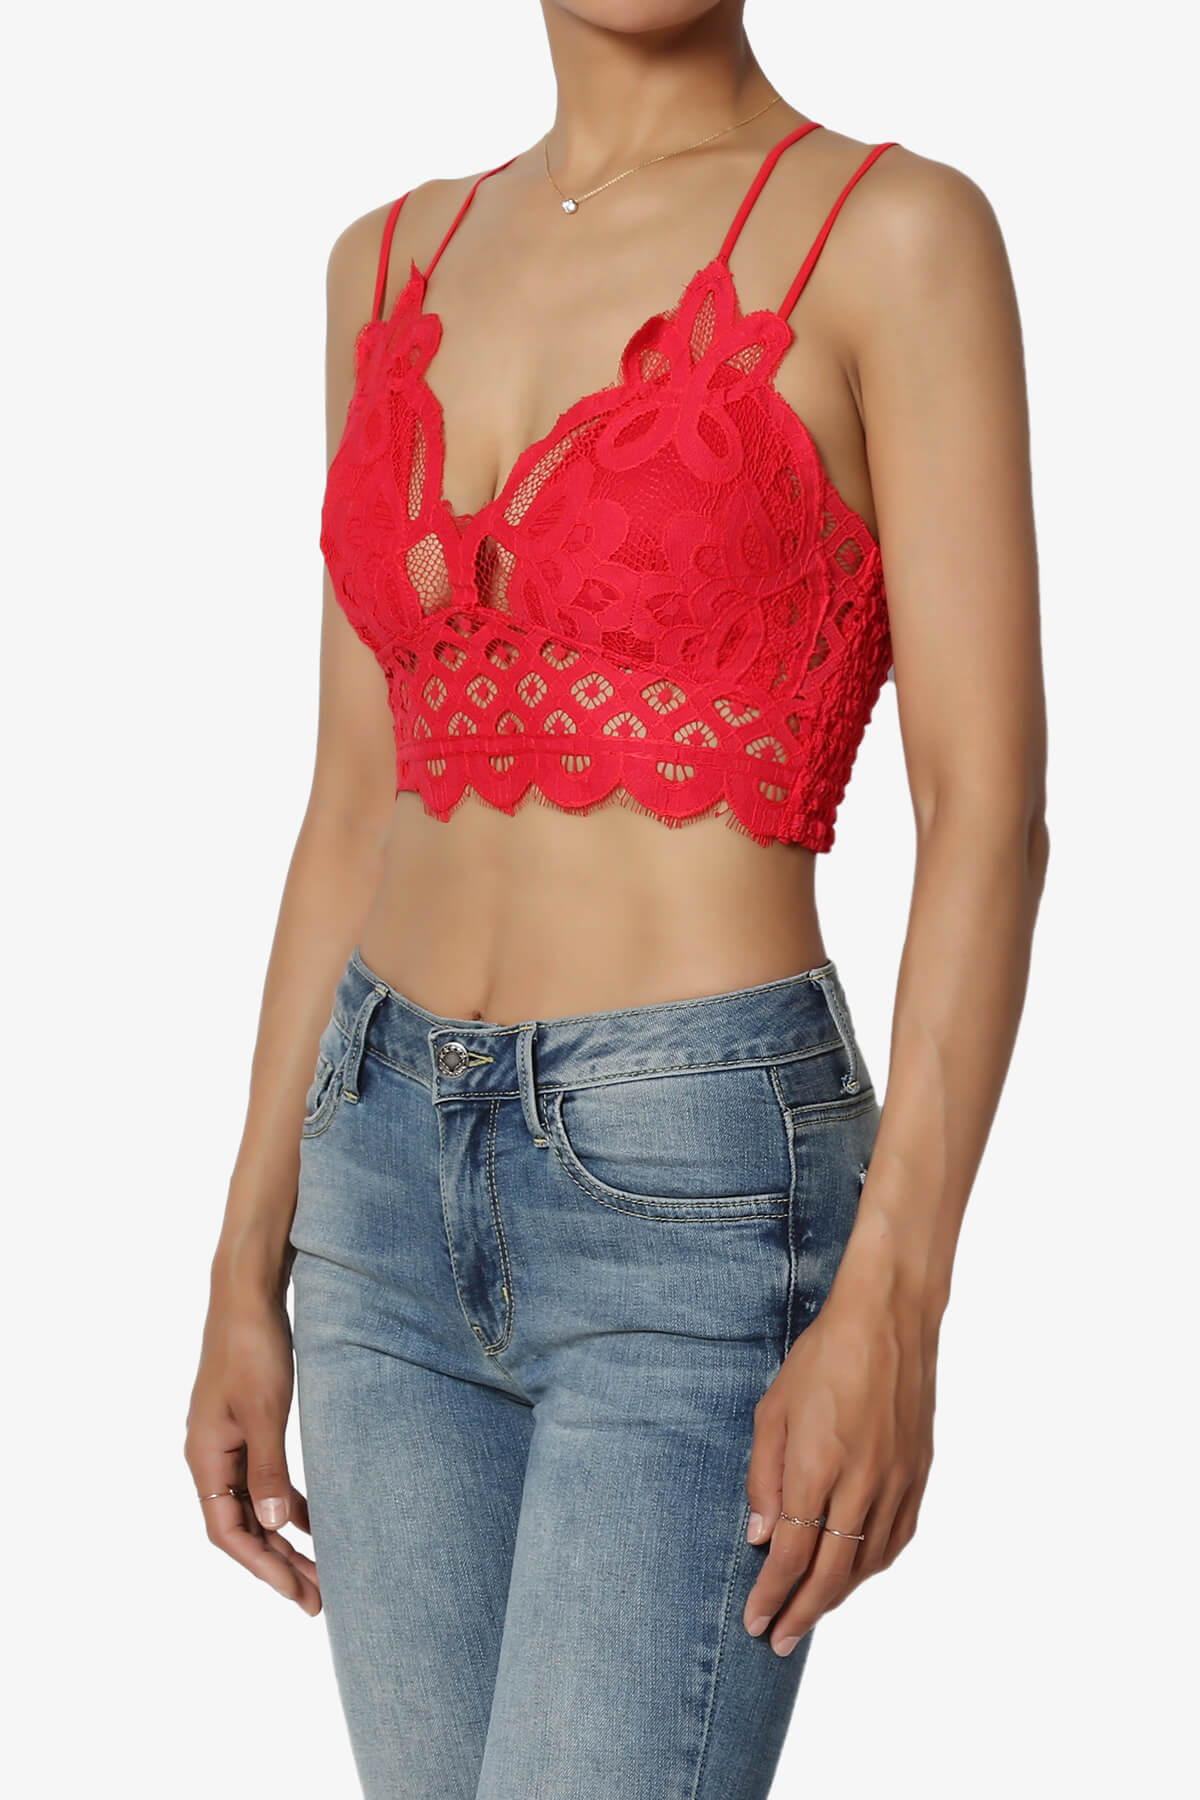 Load image into Gallery viewer, Adella Crochet Lace Bralette RED_3
